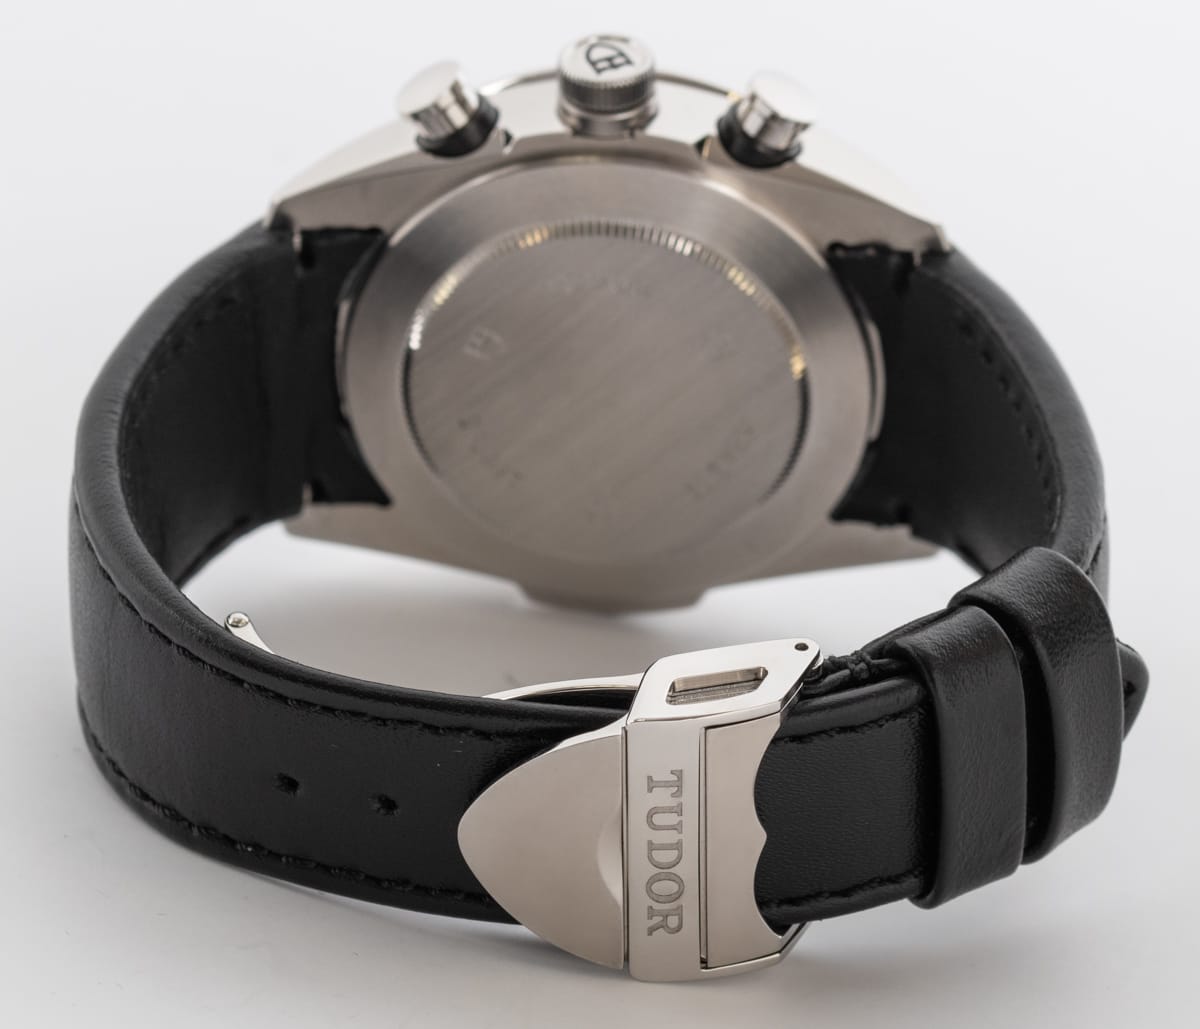 Rear / Band View of Fastrider Chronograph